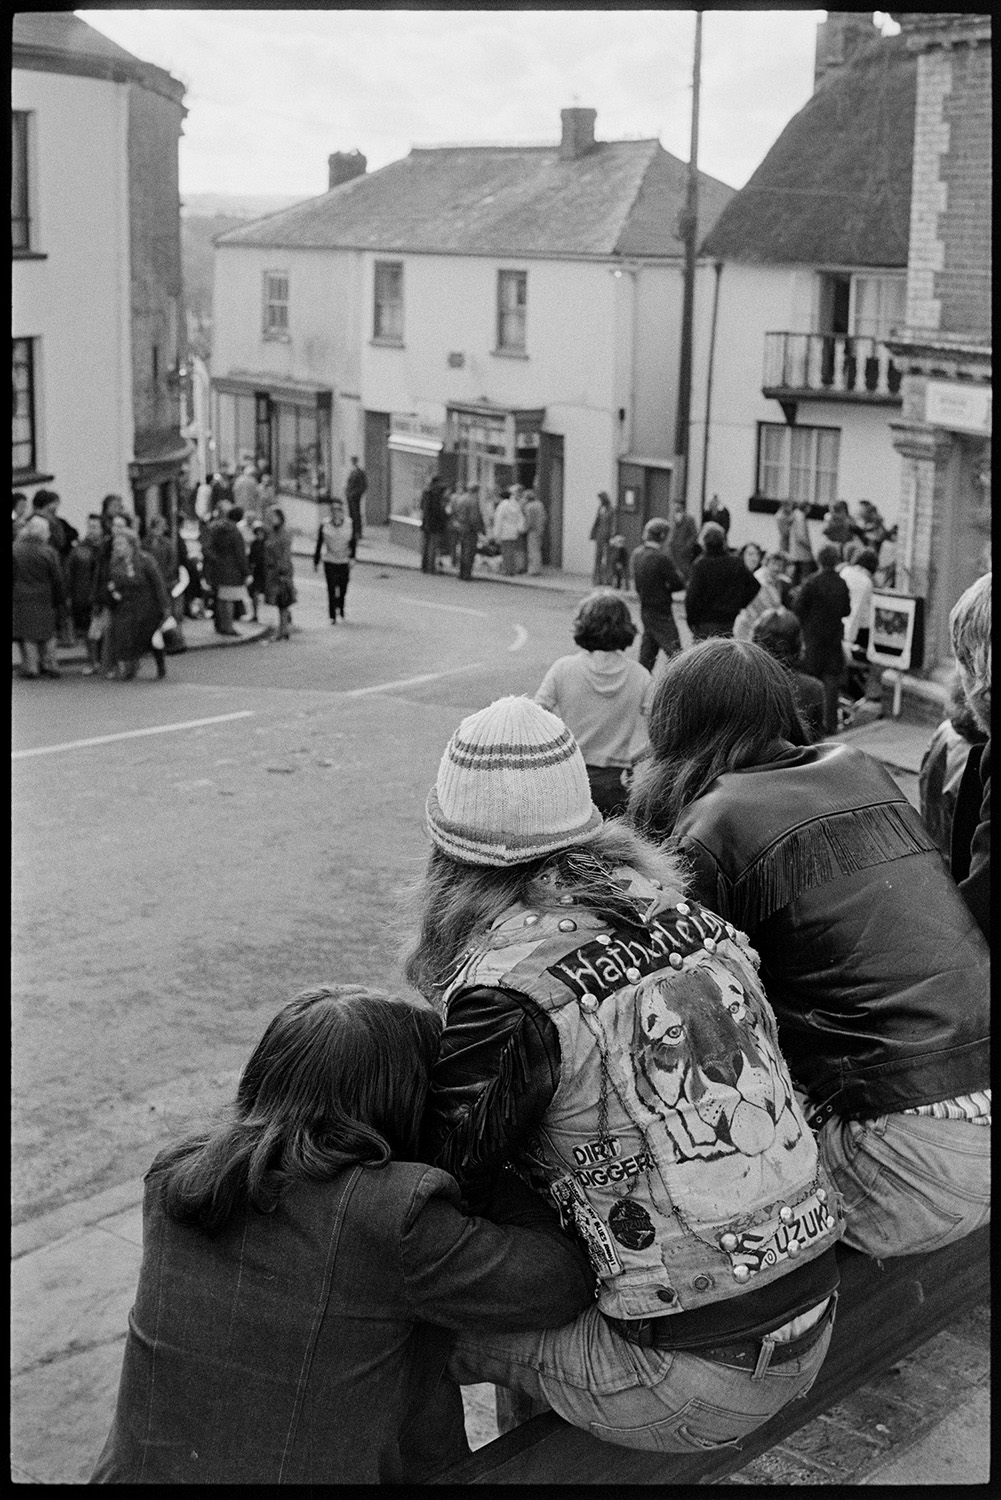 People waiting for Carnival to start, drinking and waiting in street. 
[People waiting in Market Street for Hatherleigh Carnival to start. In the foreground teenagers wearing leather and denim jackets are sat on a wall. One of the jackets has a picture of a tiger on it.]